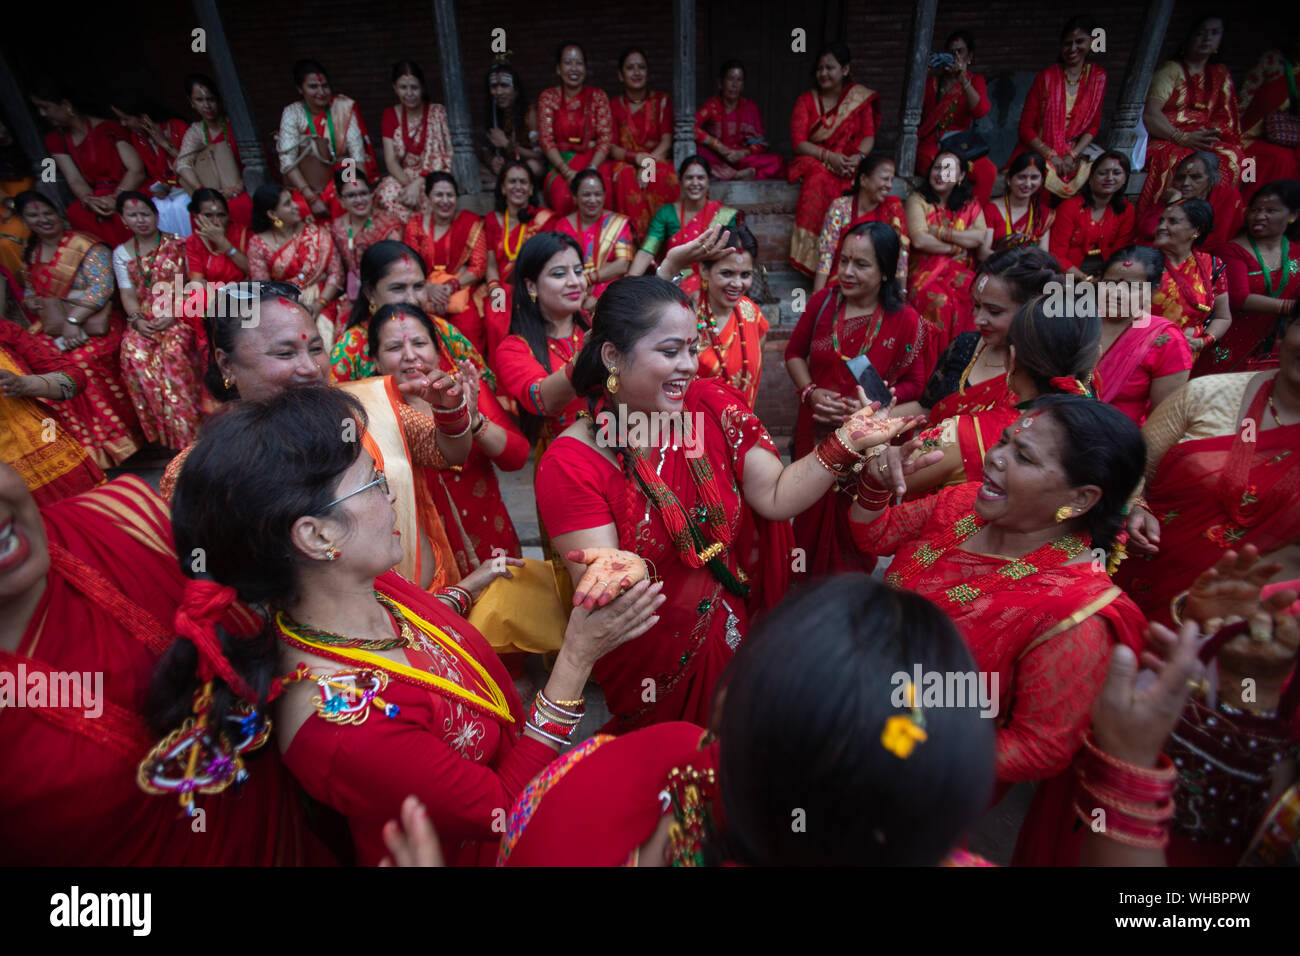 Kathmandu, Nepal. 02nd Sep, 2019. Neplese Hindu Women sing and dance at the premises of Pashupatinath Temple during the Teej festival in Kathmandu, Nepal on Monday 2 September, 2019. During this festival, Hindu women observe a day-long fast and pray for their husbands and for a happy married life. Those who are unmarried pray for a good husband. (Photo by Prabin Ranabhat/Pacific Press) Credit: Pacific Press Agency/Alamy Live News Stock Photo